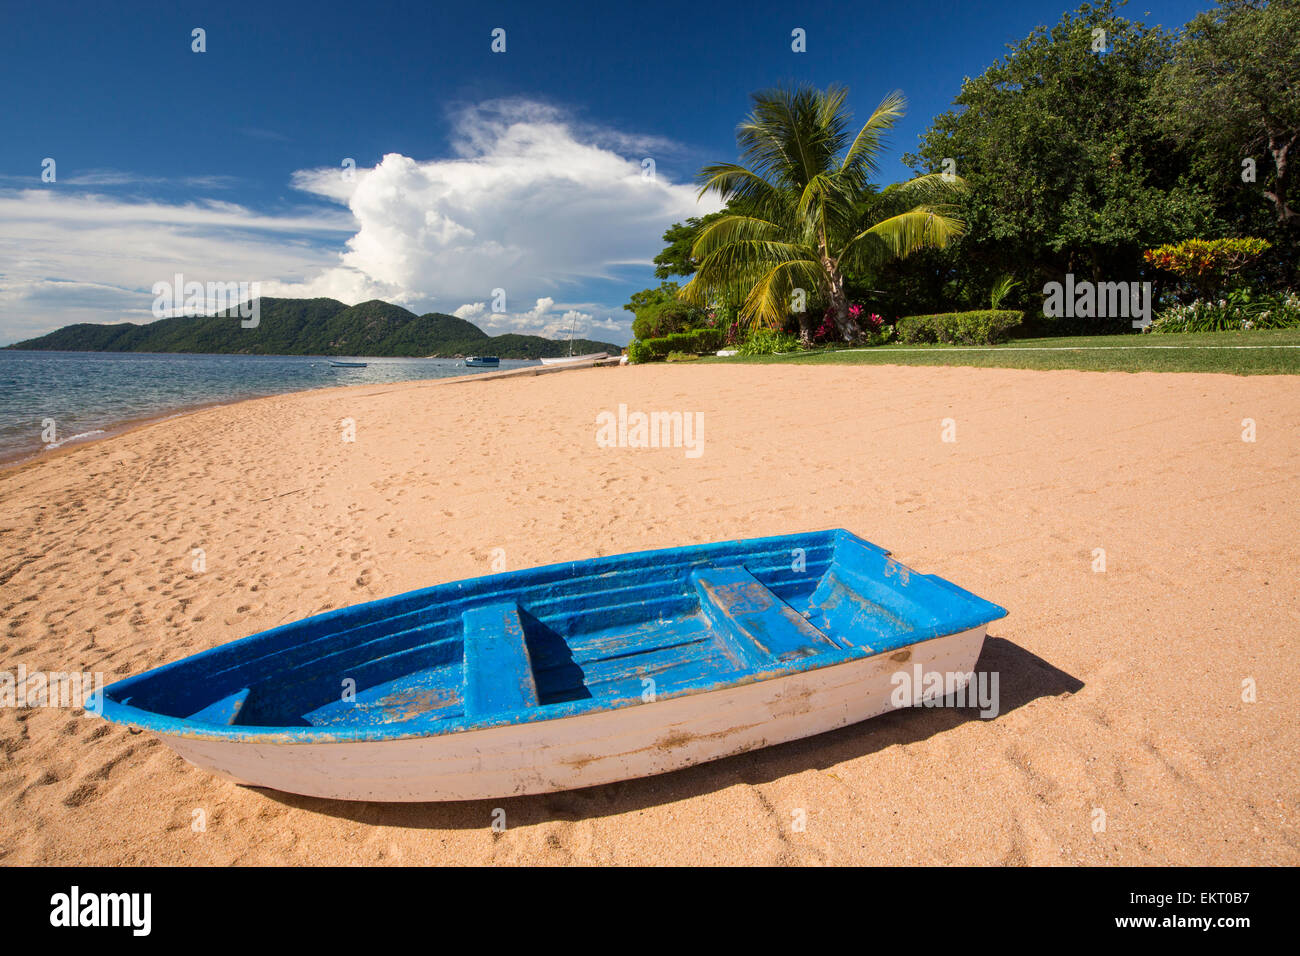 A boat on a beach at Cape Maclear on the shores of Lake Malawi, Malawi, Africa. Stock Photo